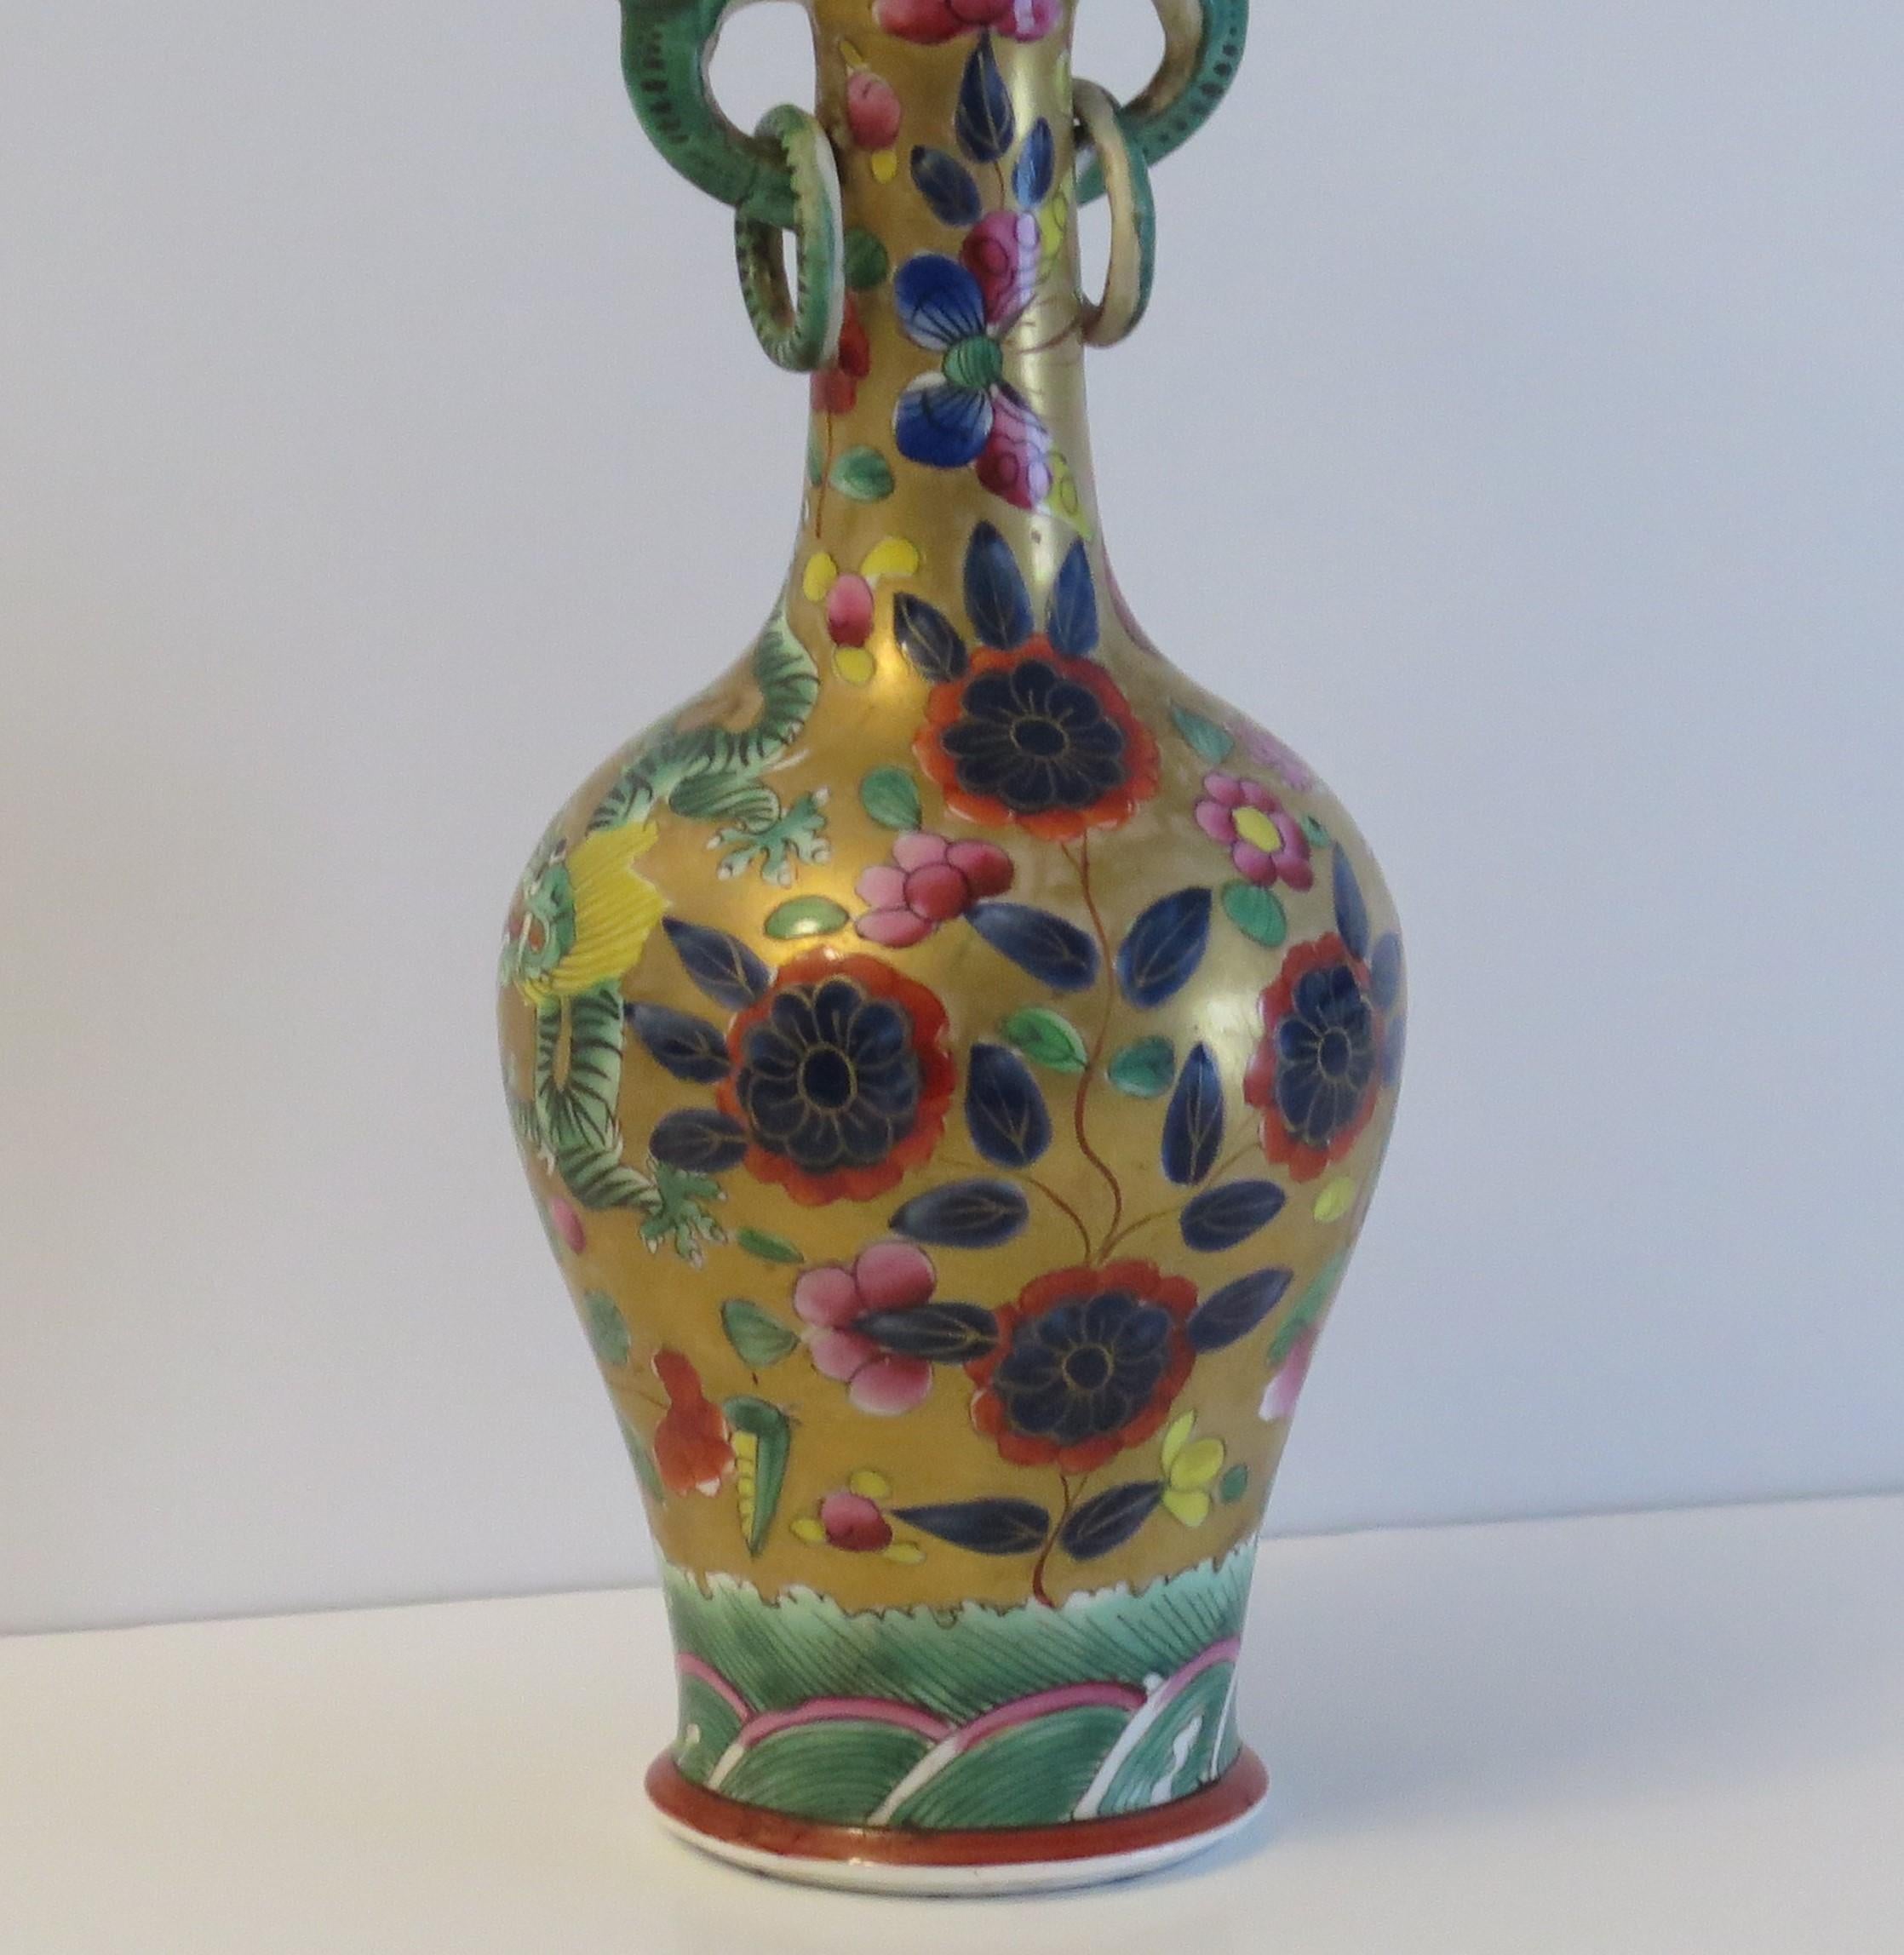 Glazed Very Rare Mason's Ironstone Bottle Vase in Chinese Dragon Pattern, circa 1820 For Sale